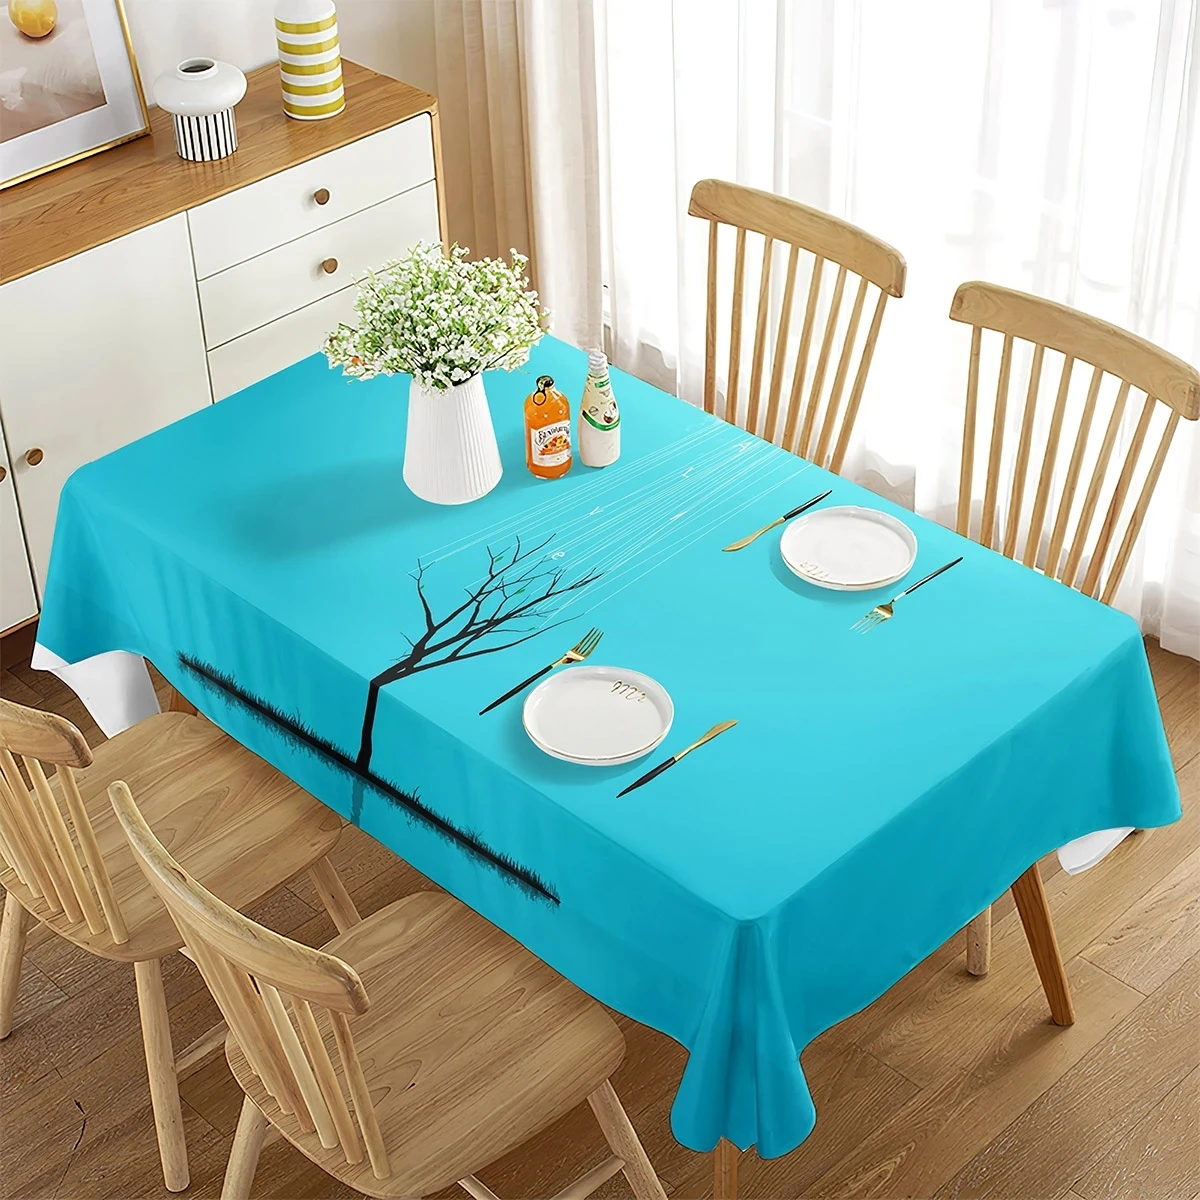 

Tablecloth Line Sketch Human Face Outline Rectangular Tablecloth--5YS